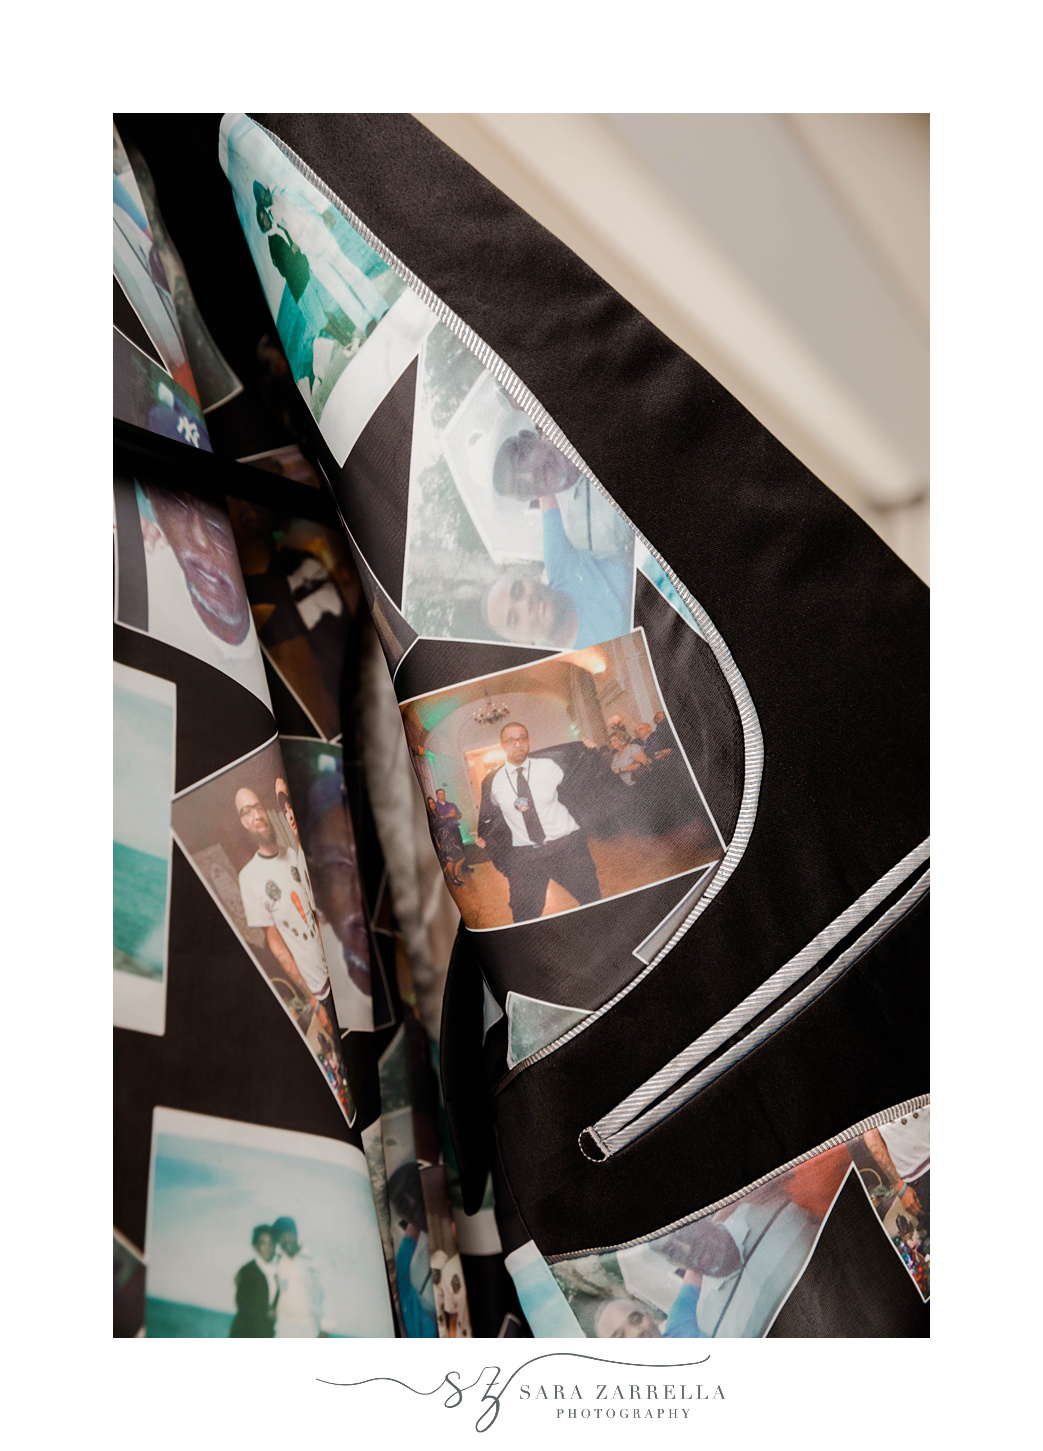 liner of custom jacket with photos inside